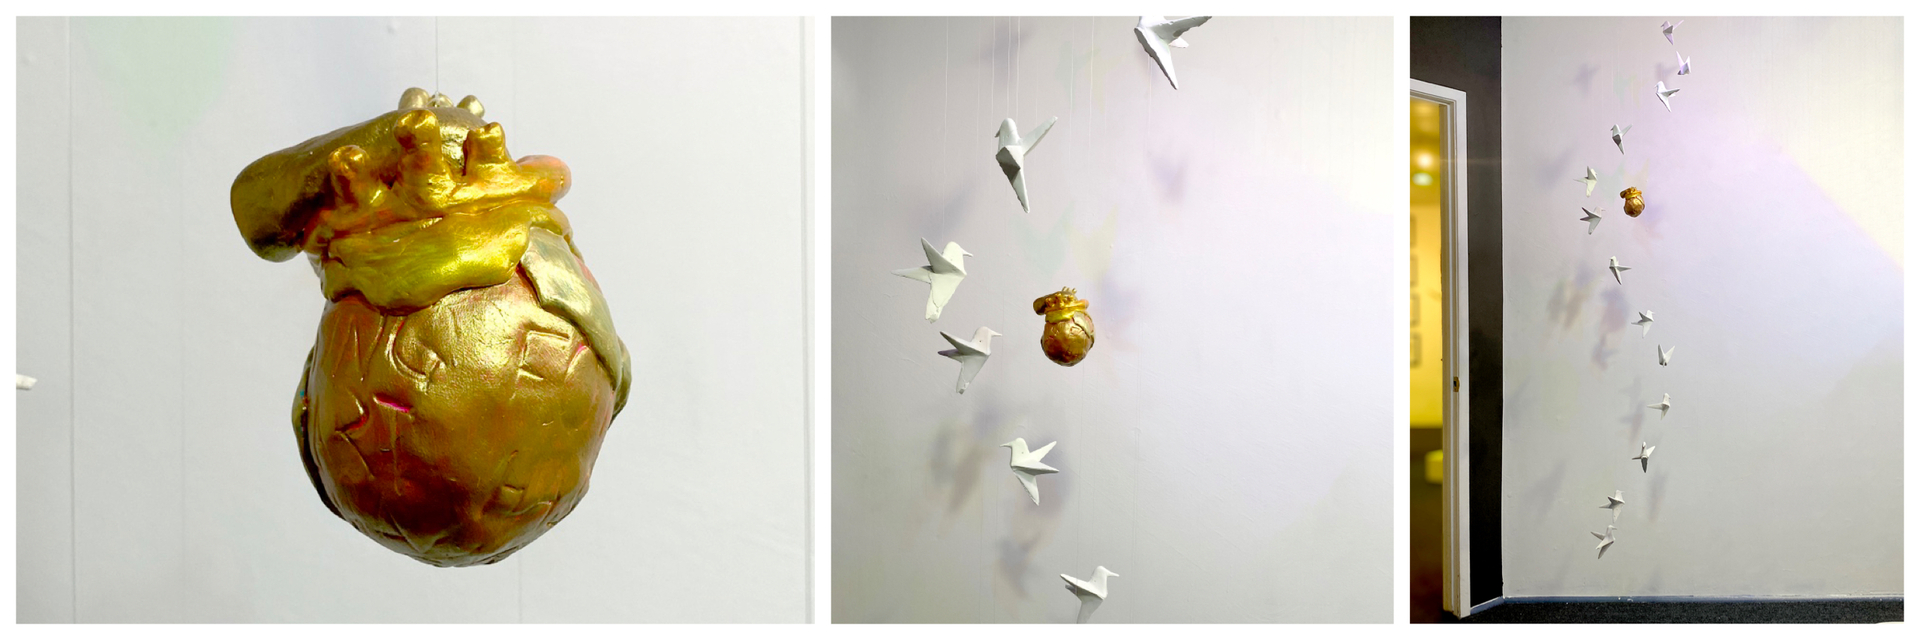 a suspended golden human heat with white paper-like cranes suspended around the heart. 